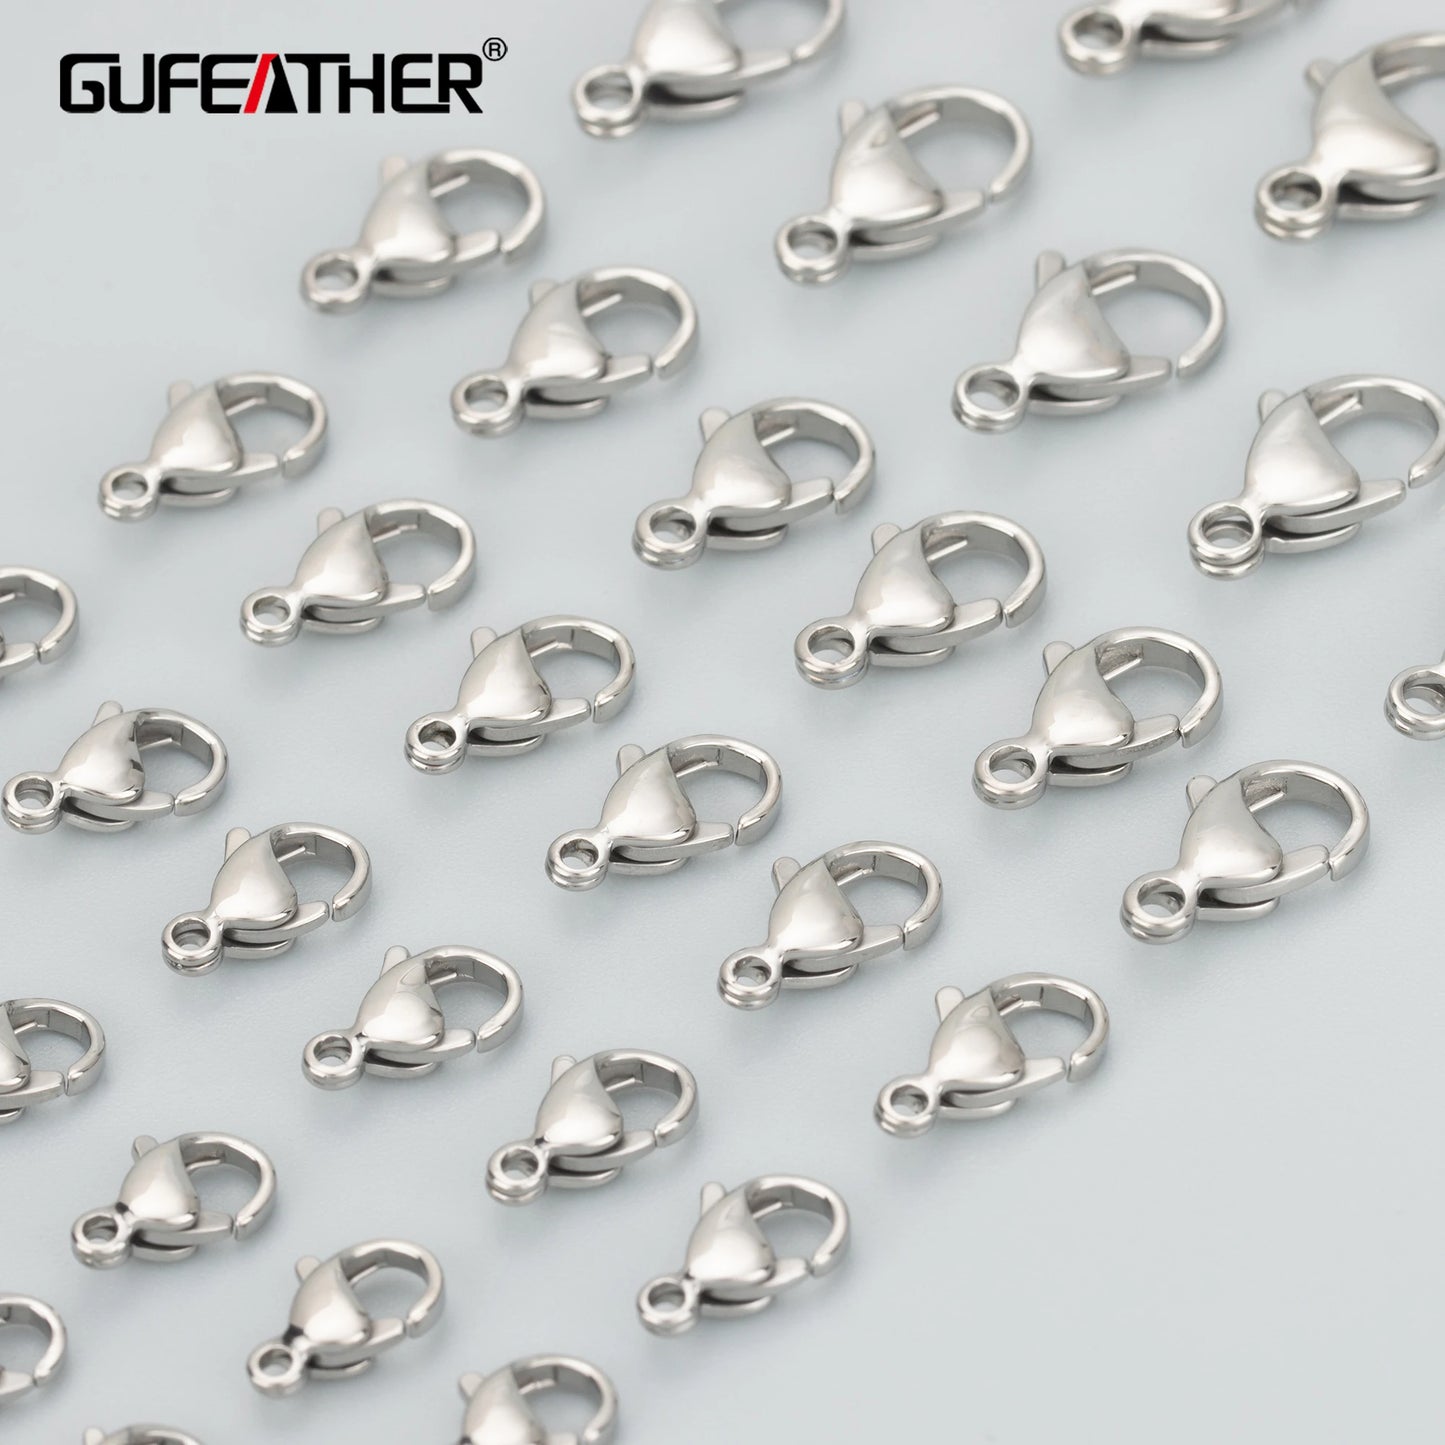 GUFEATHER MB83,jewelry accessories,pass REACH,nickel free,stainless steel,jewelry making findings,clasp hooks,10pcs/lot